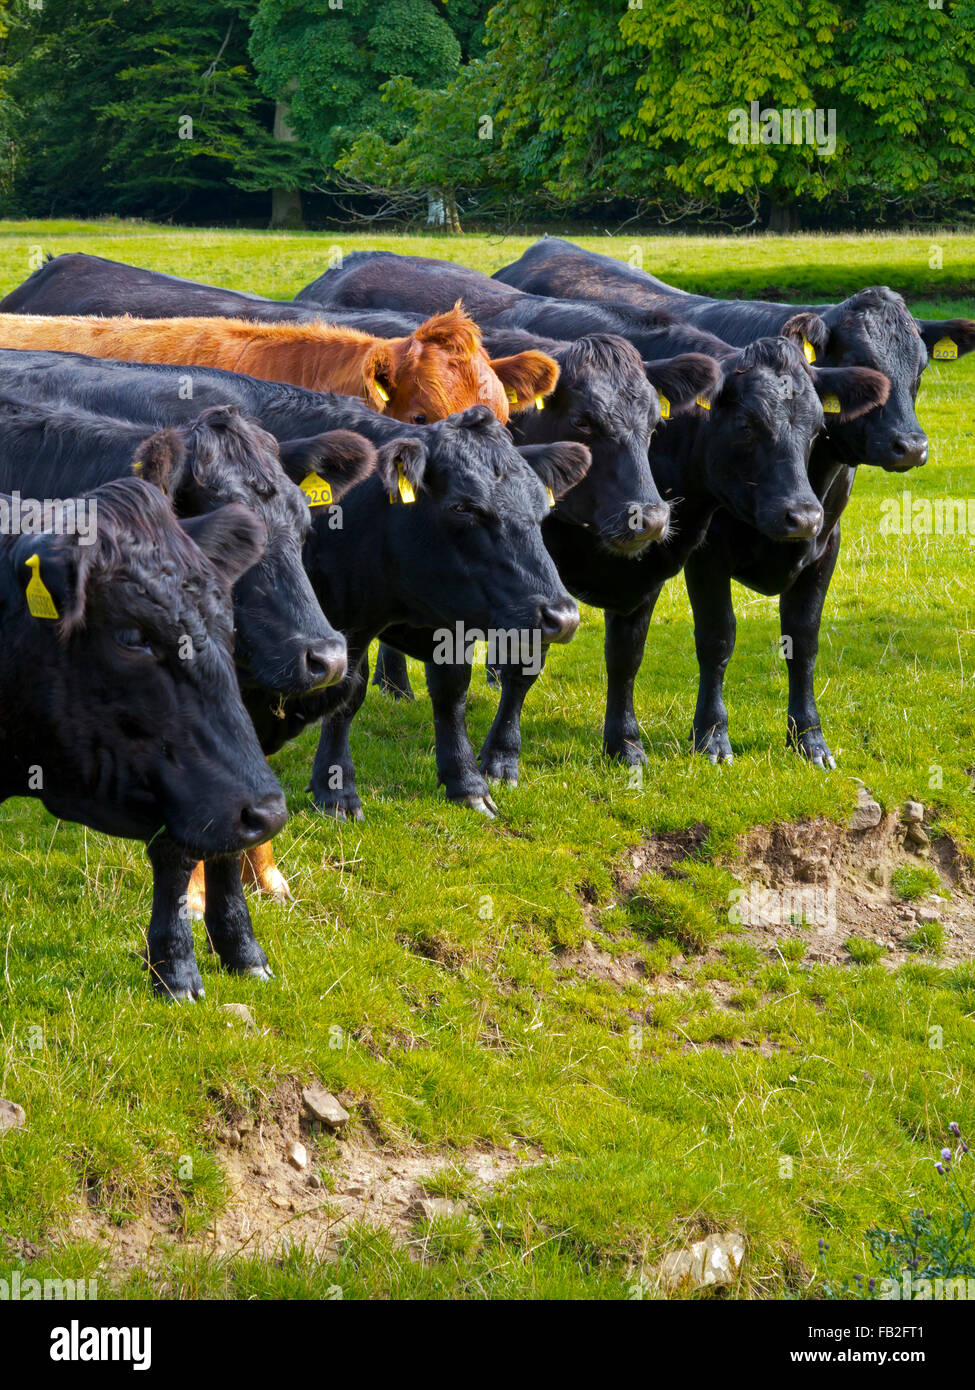 Herd of black and brown grazing cattle standing in a line in a field with identification tags attached to their ears Stock Photo